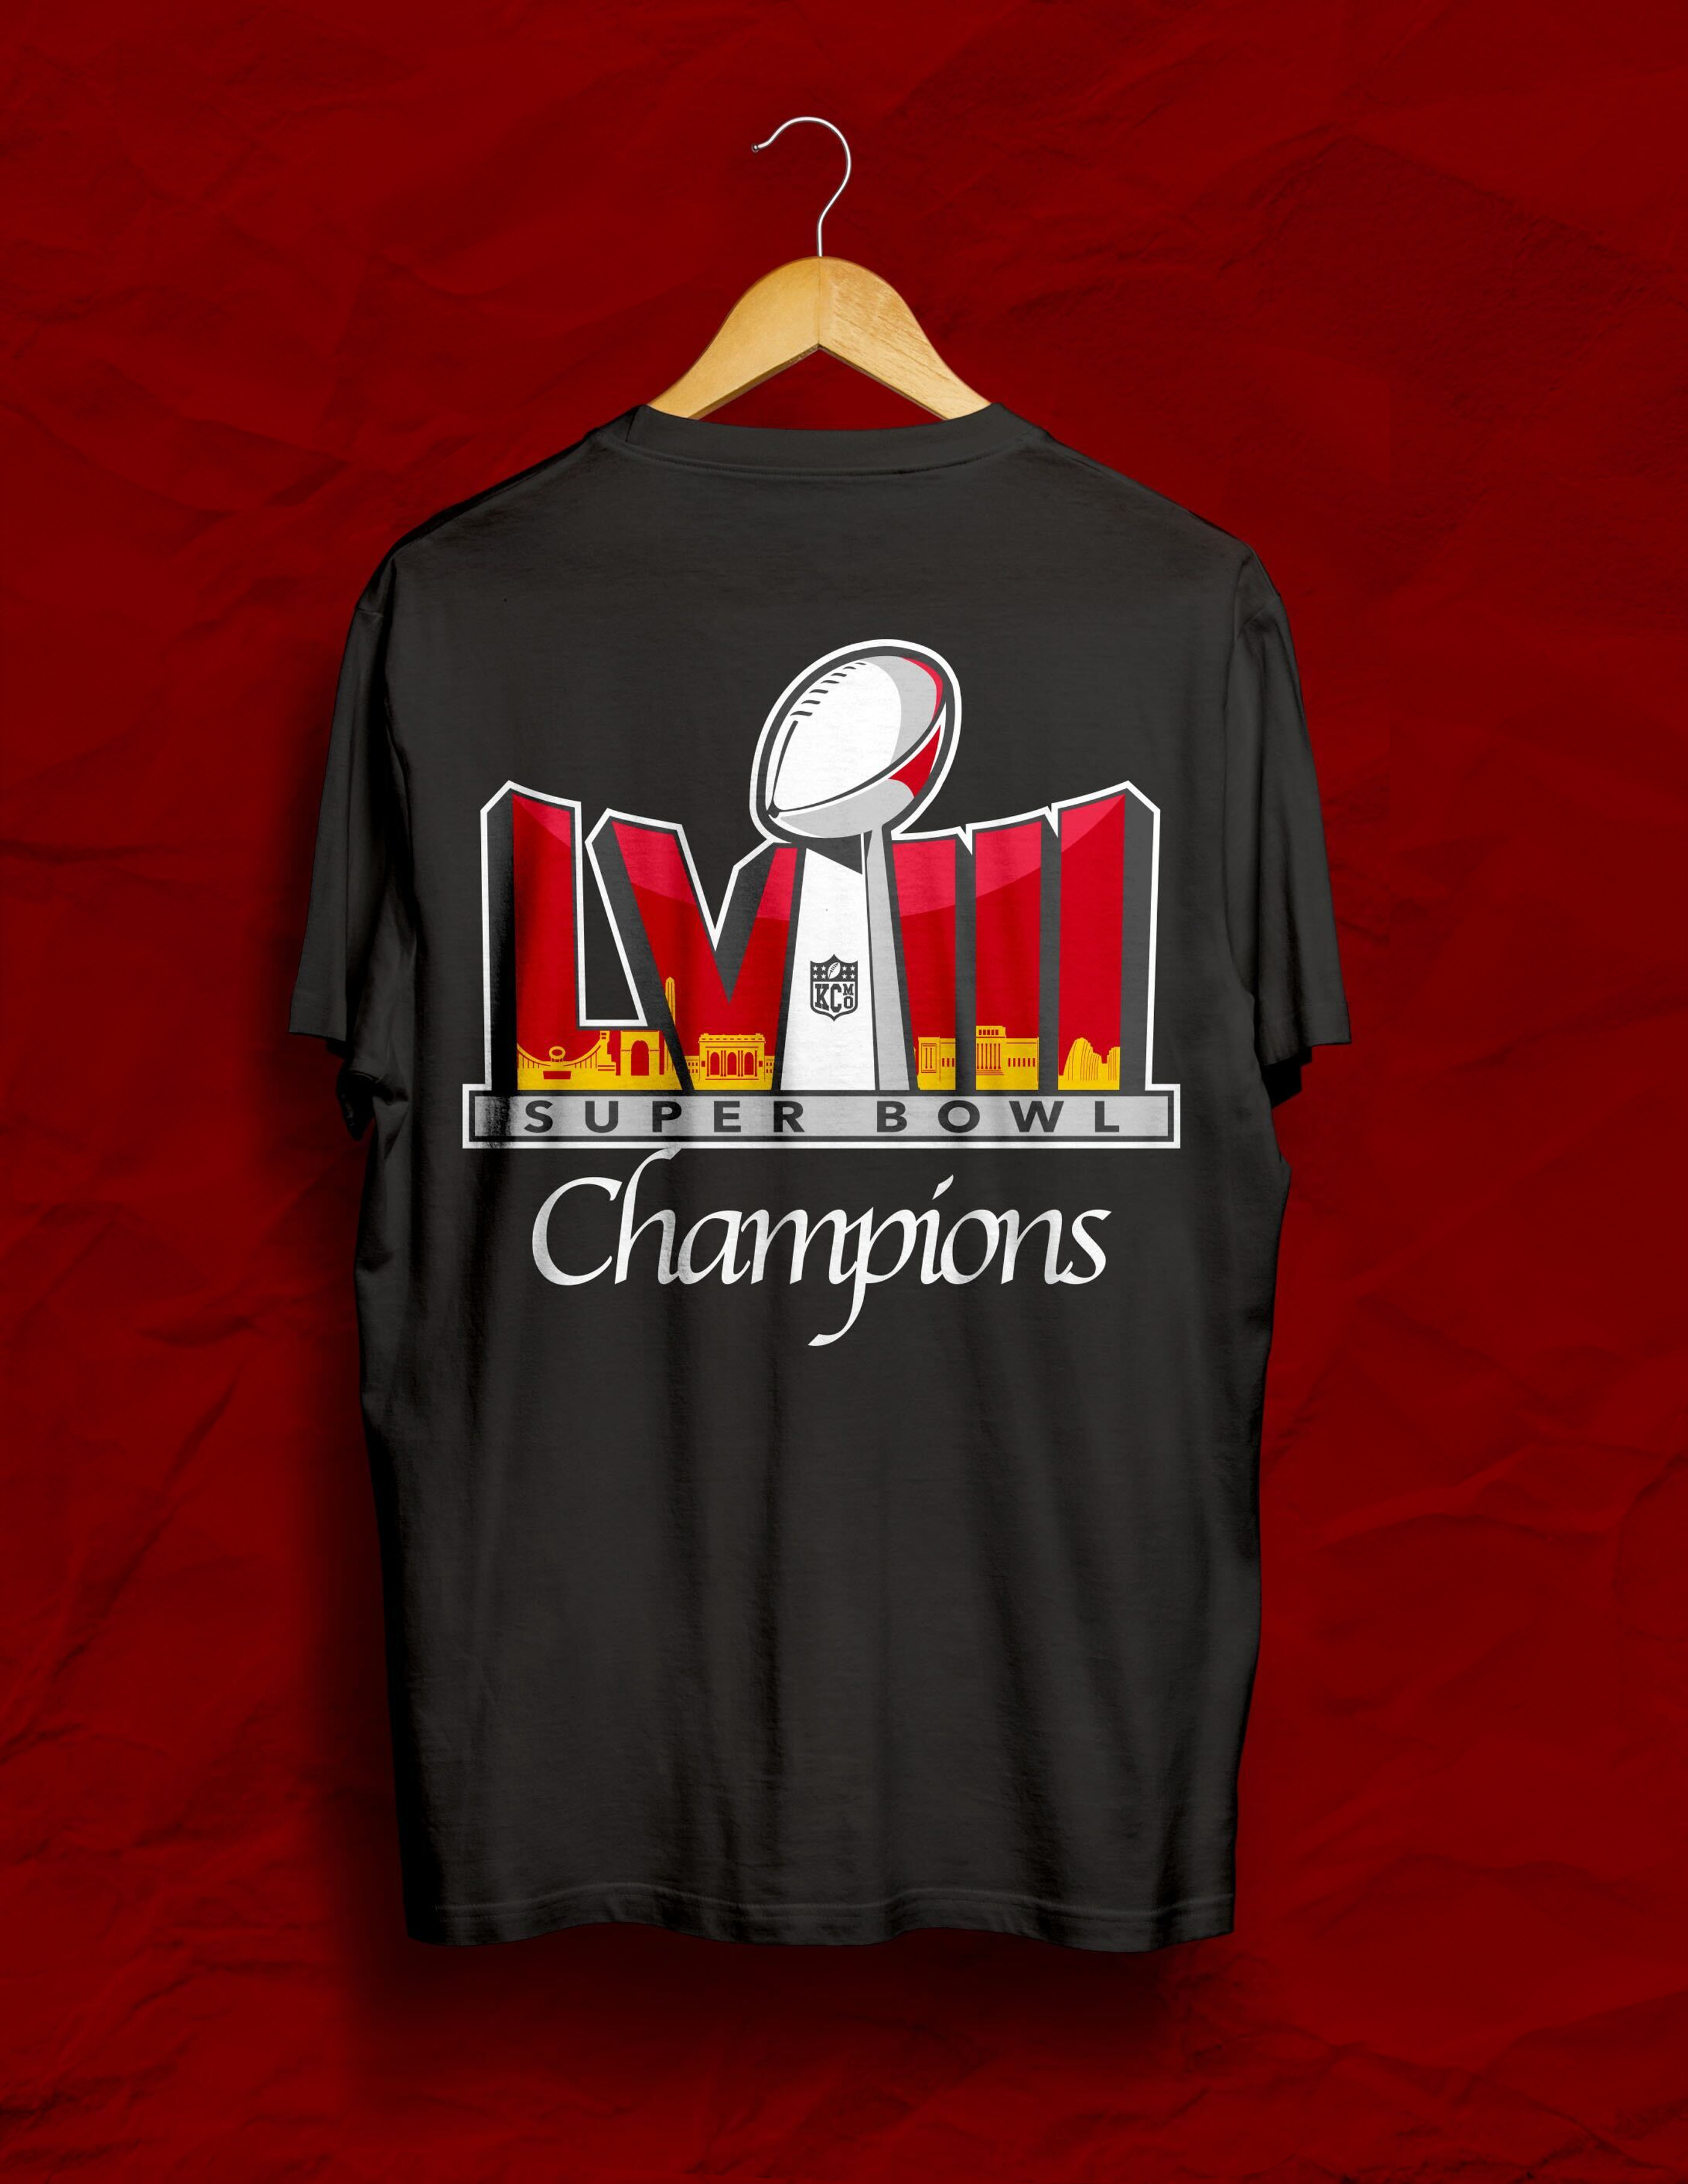 NIGHT MARKET CO-OP: Powered by LANDLOCKED Super Bowl Champions PREORDER